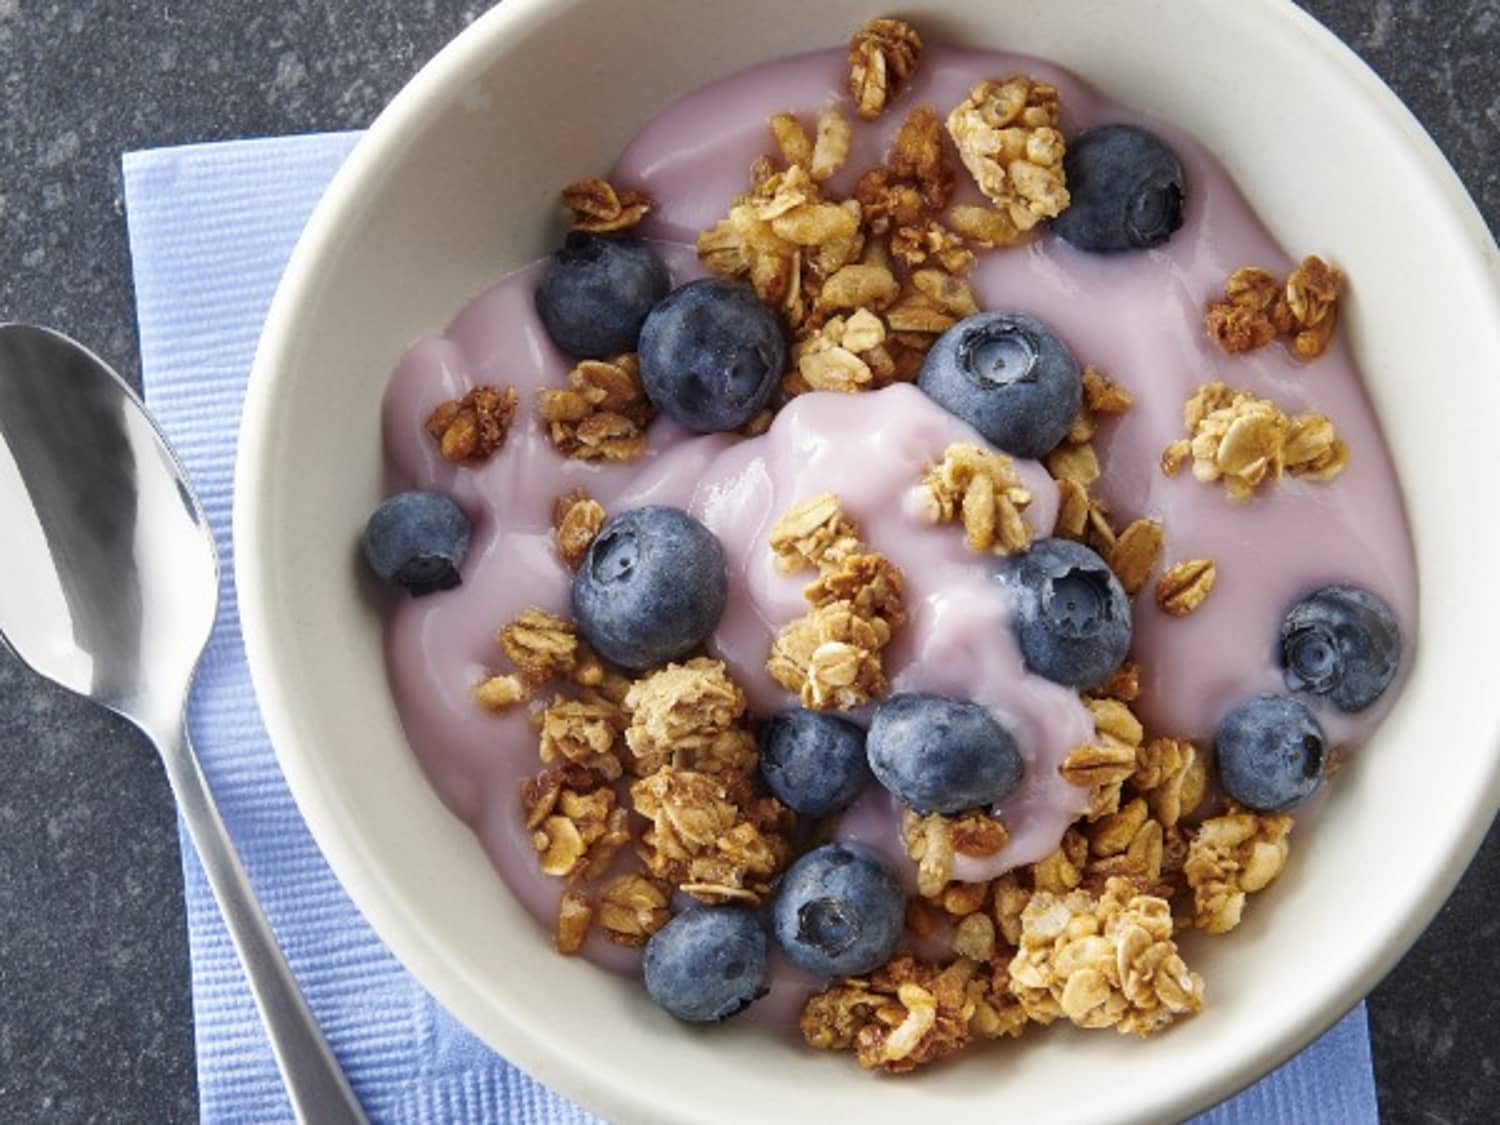 Bowl of yogurt with granola and blueberries